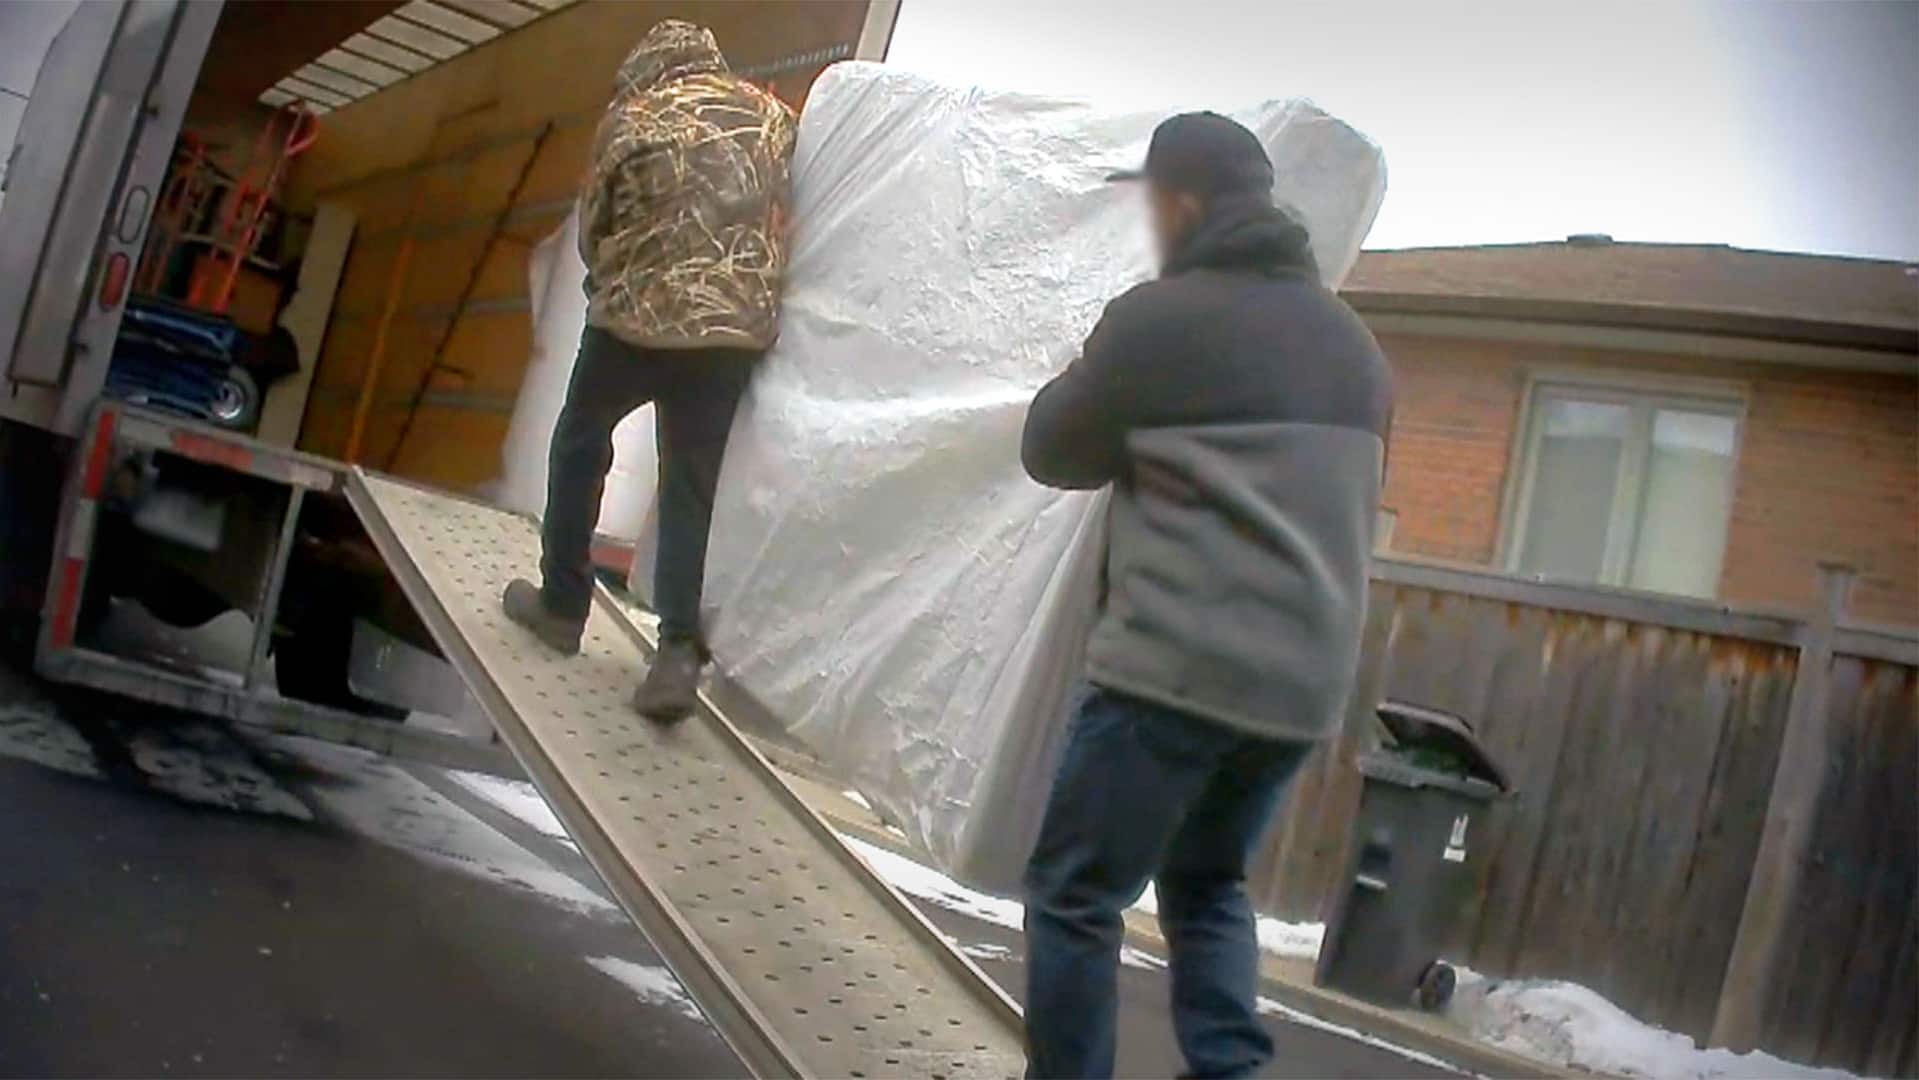 Secret trackers and hidden cameras expose how some movers could be ripping you off